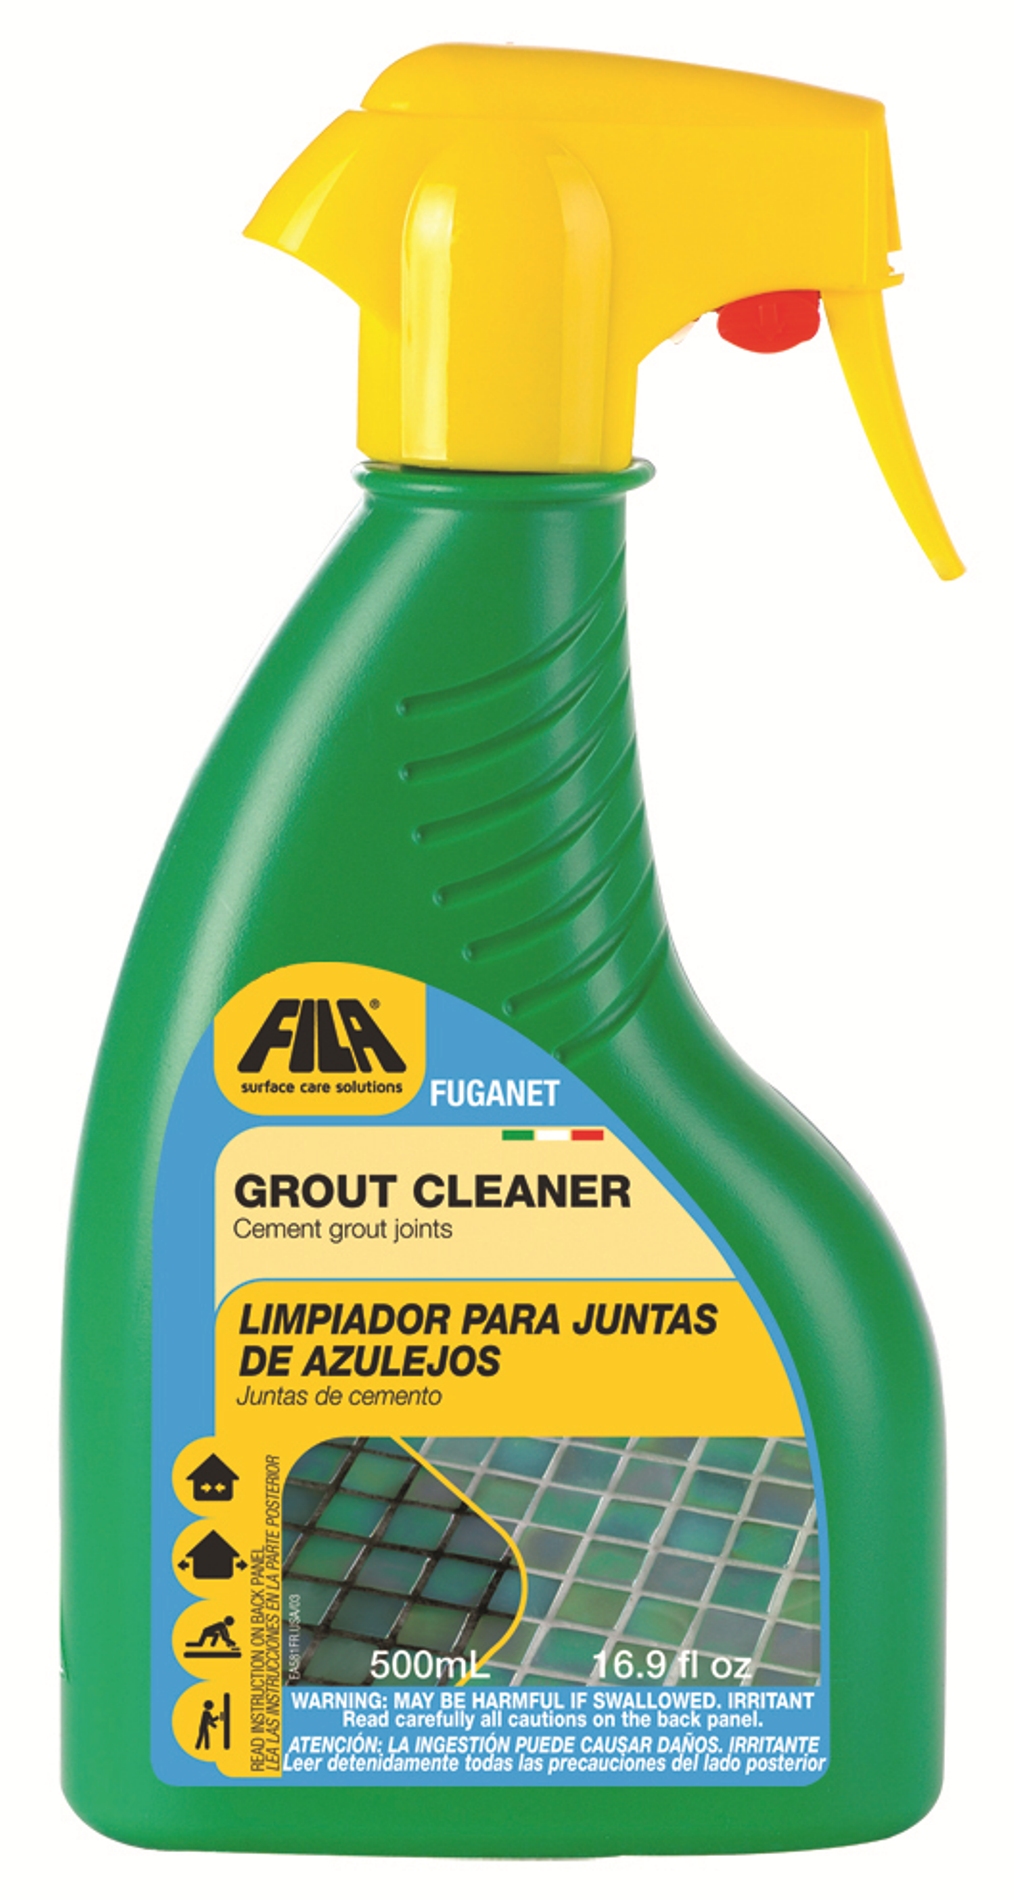 Fila Fuganet Grout Cleaner